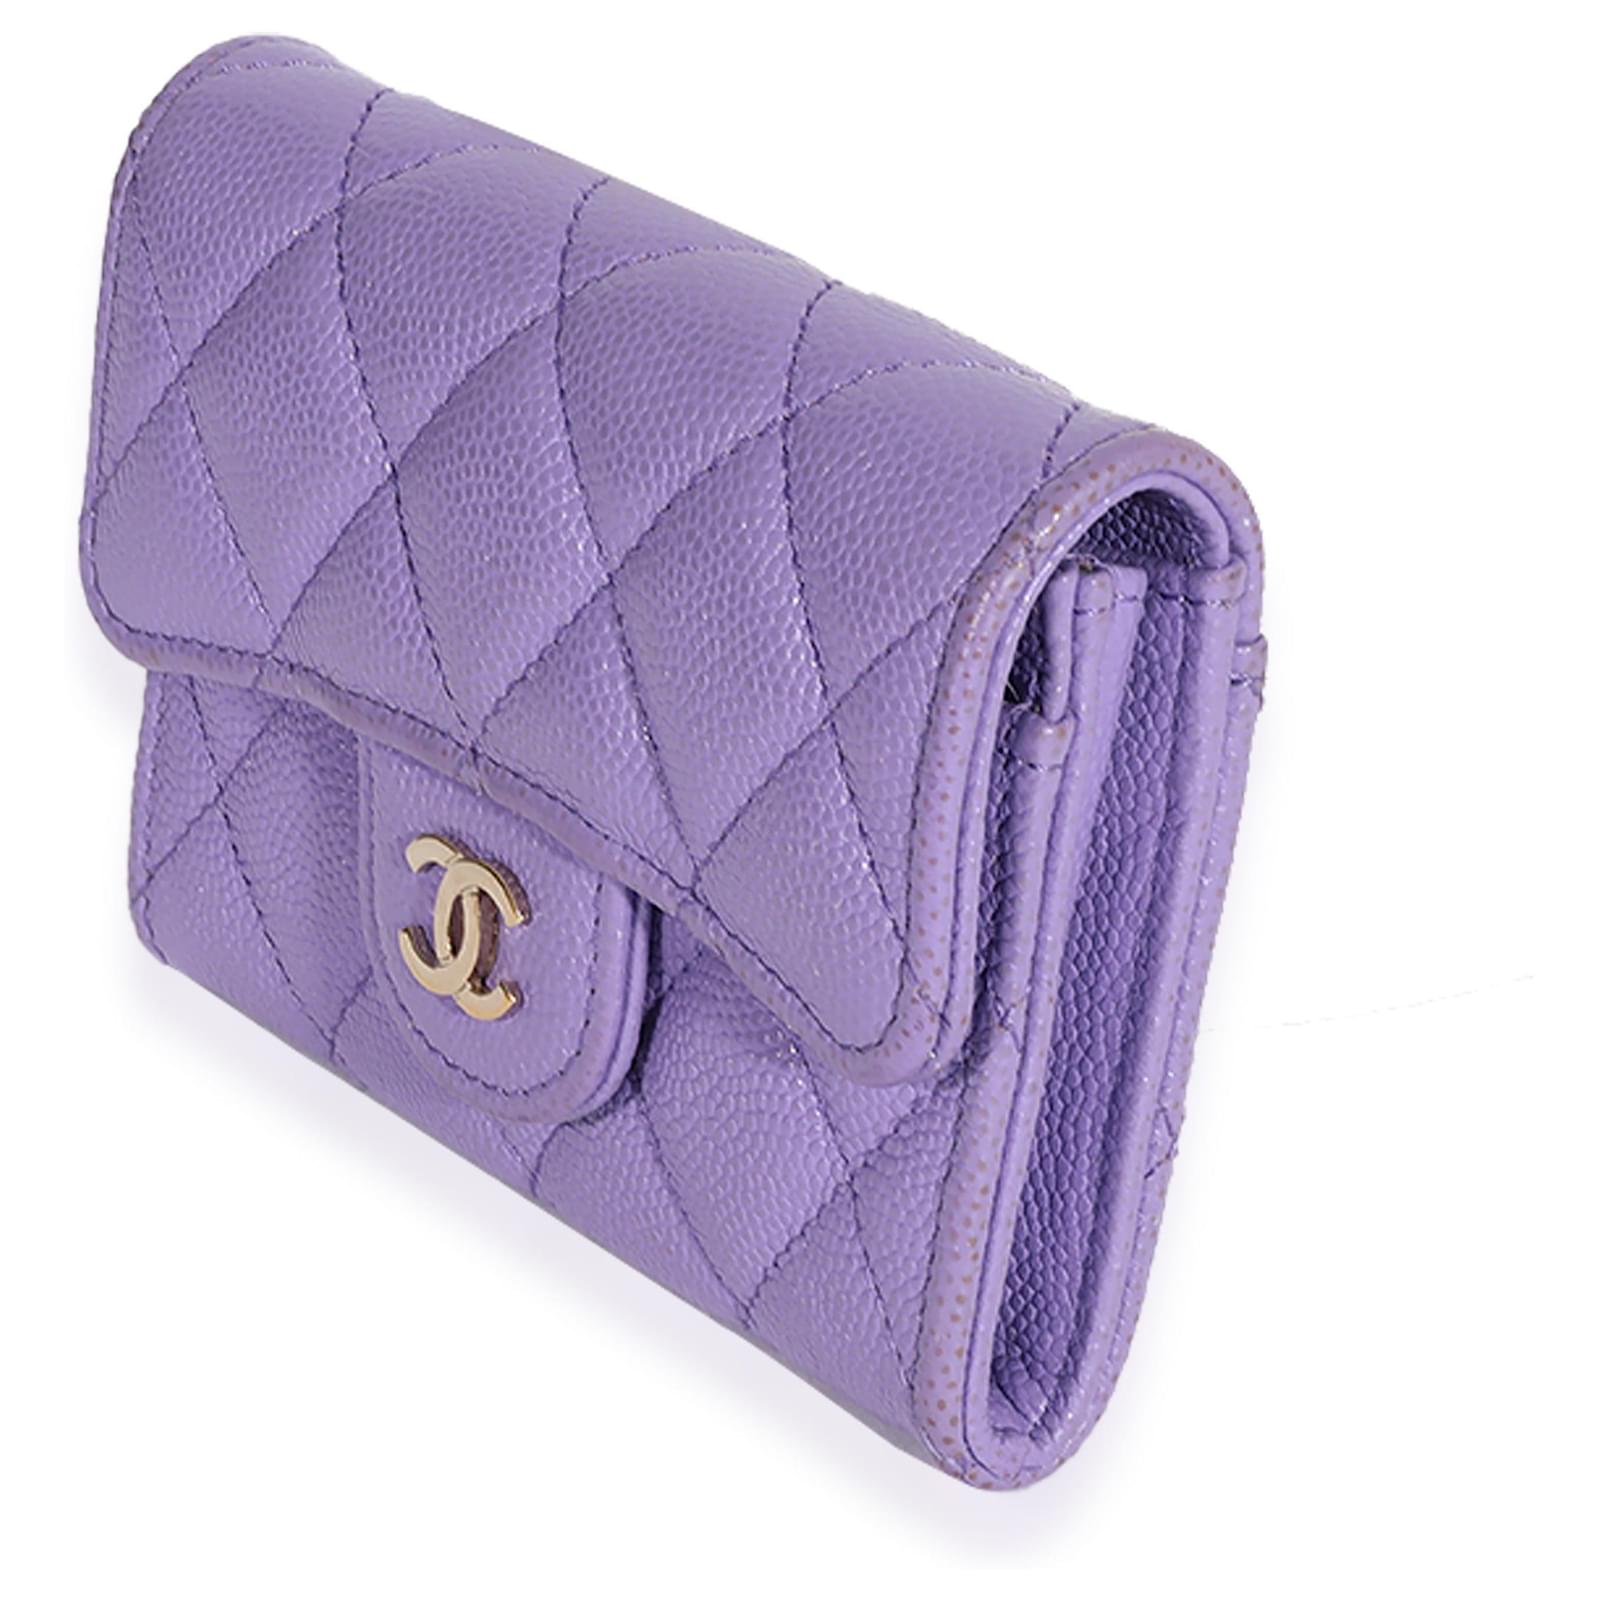 Chanel Caviar Quilted Flap Card Holder Lilac Rose Clair Gold Hardware –  Coco Approved Studio